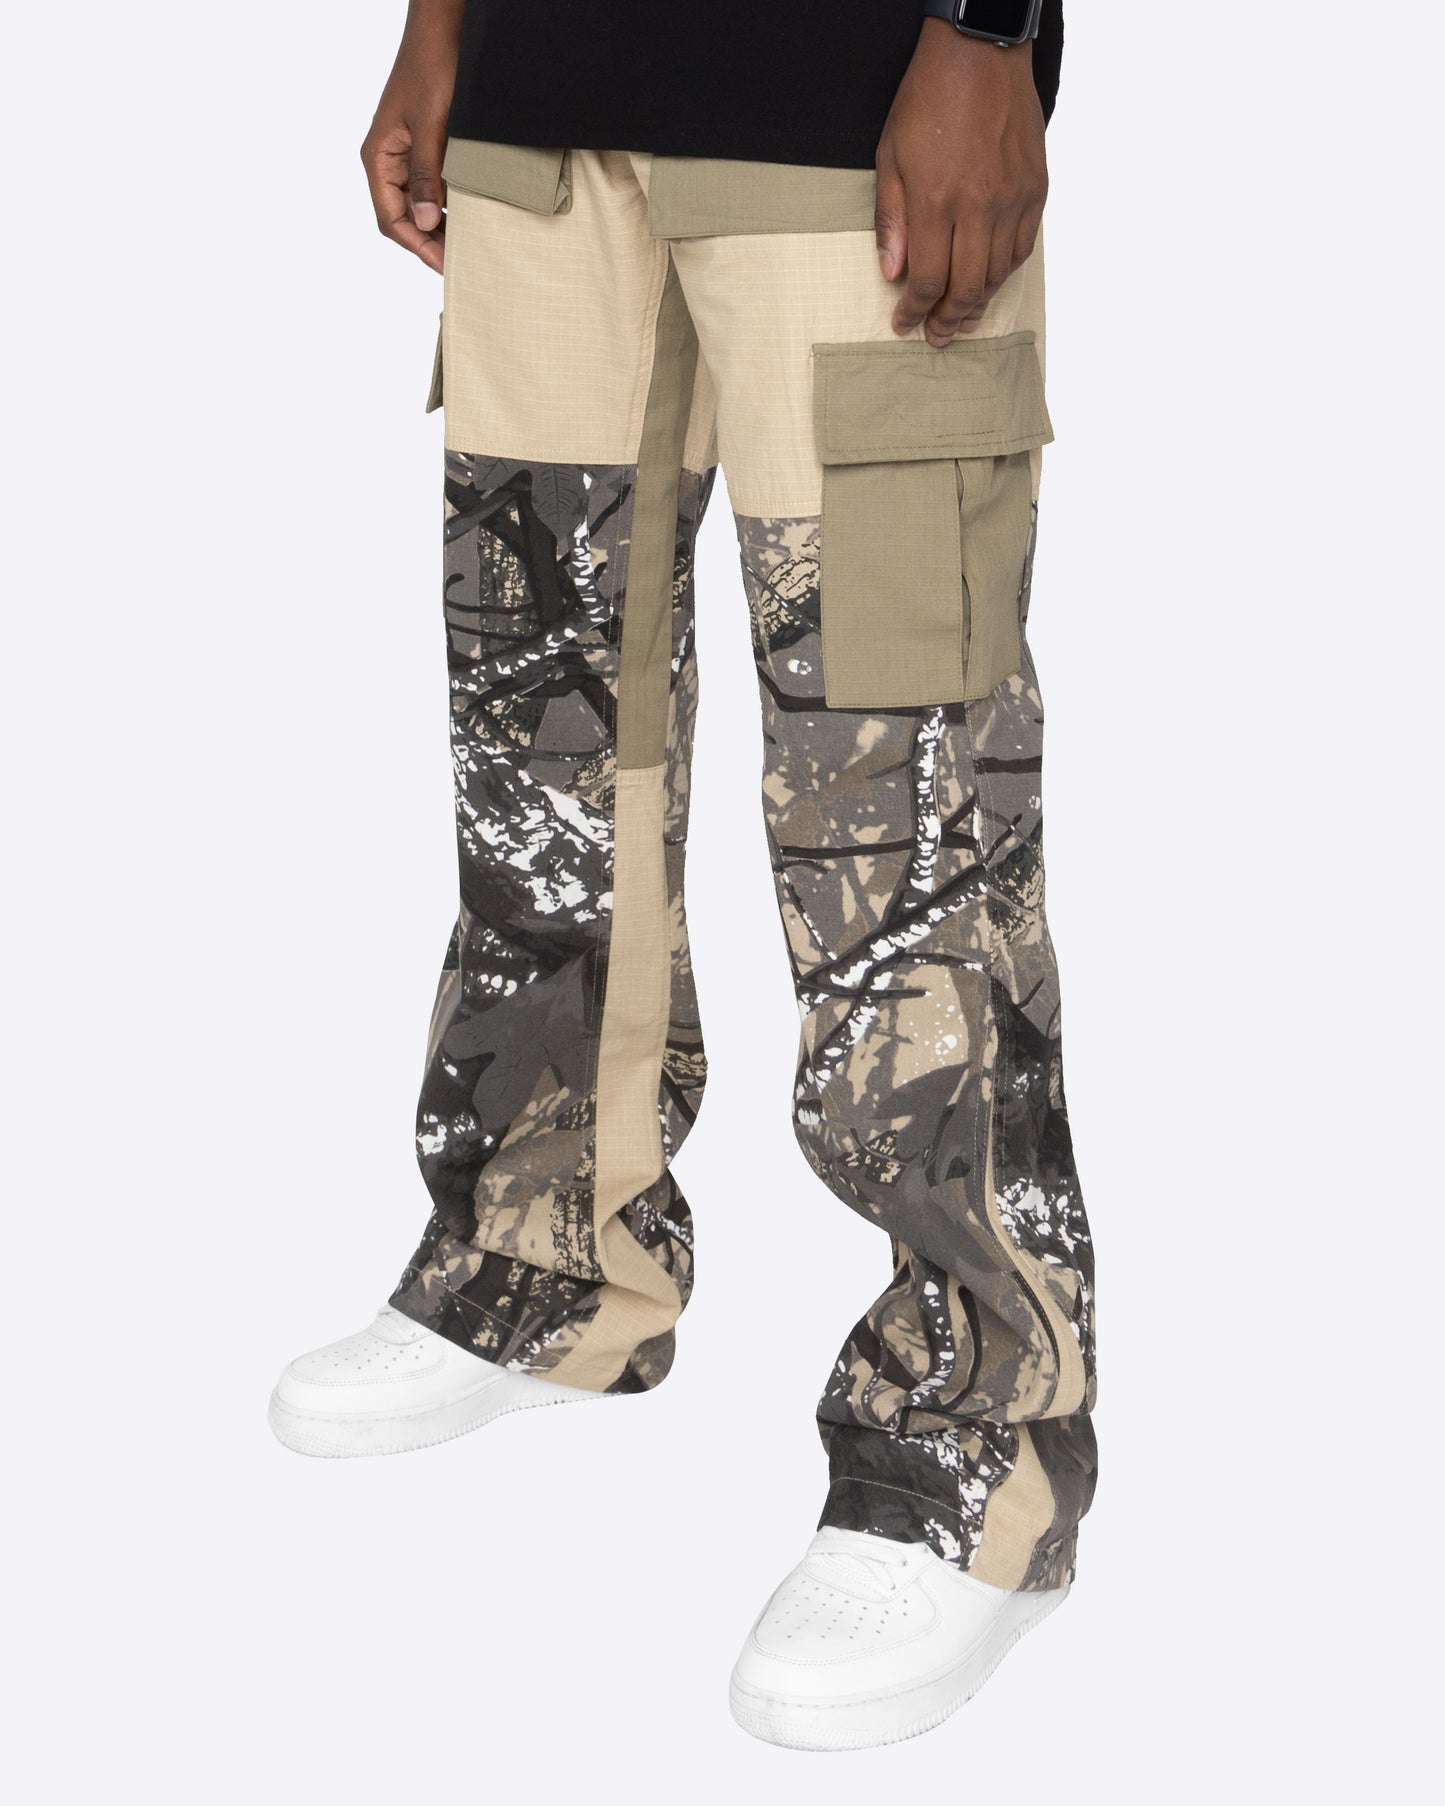 DAVE EAST FTD CARGOS-OLIVE CAMO